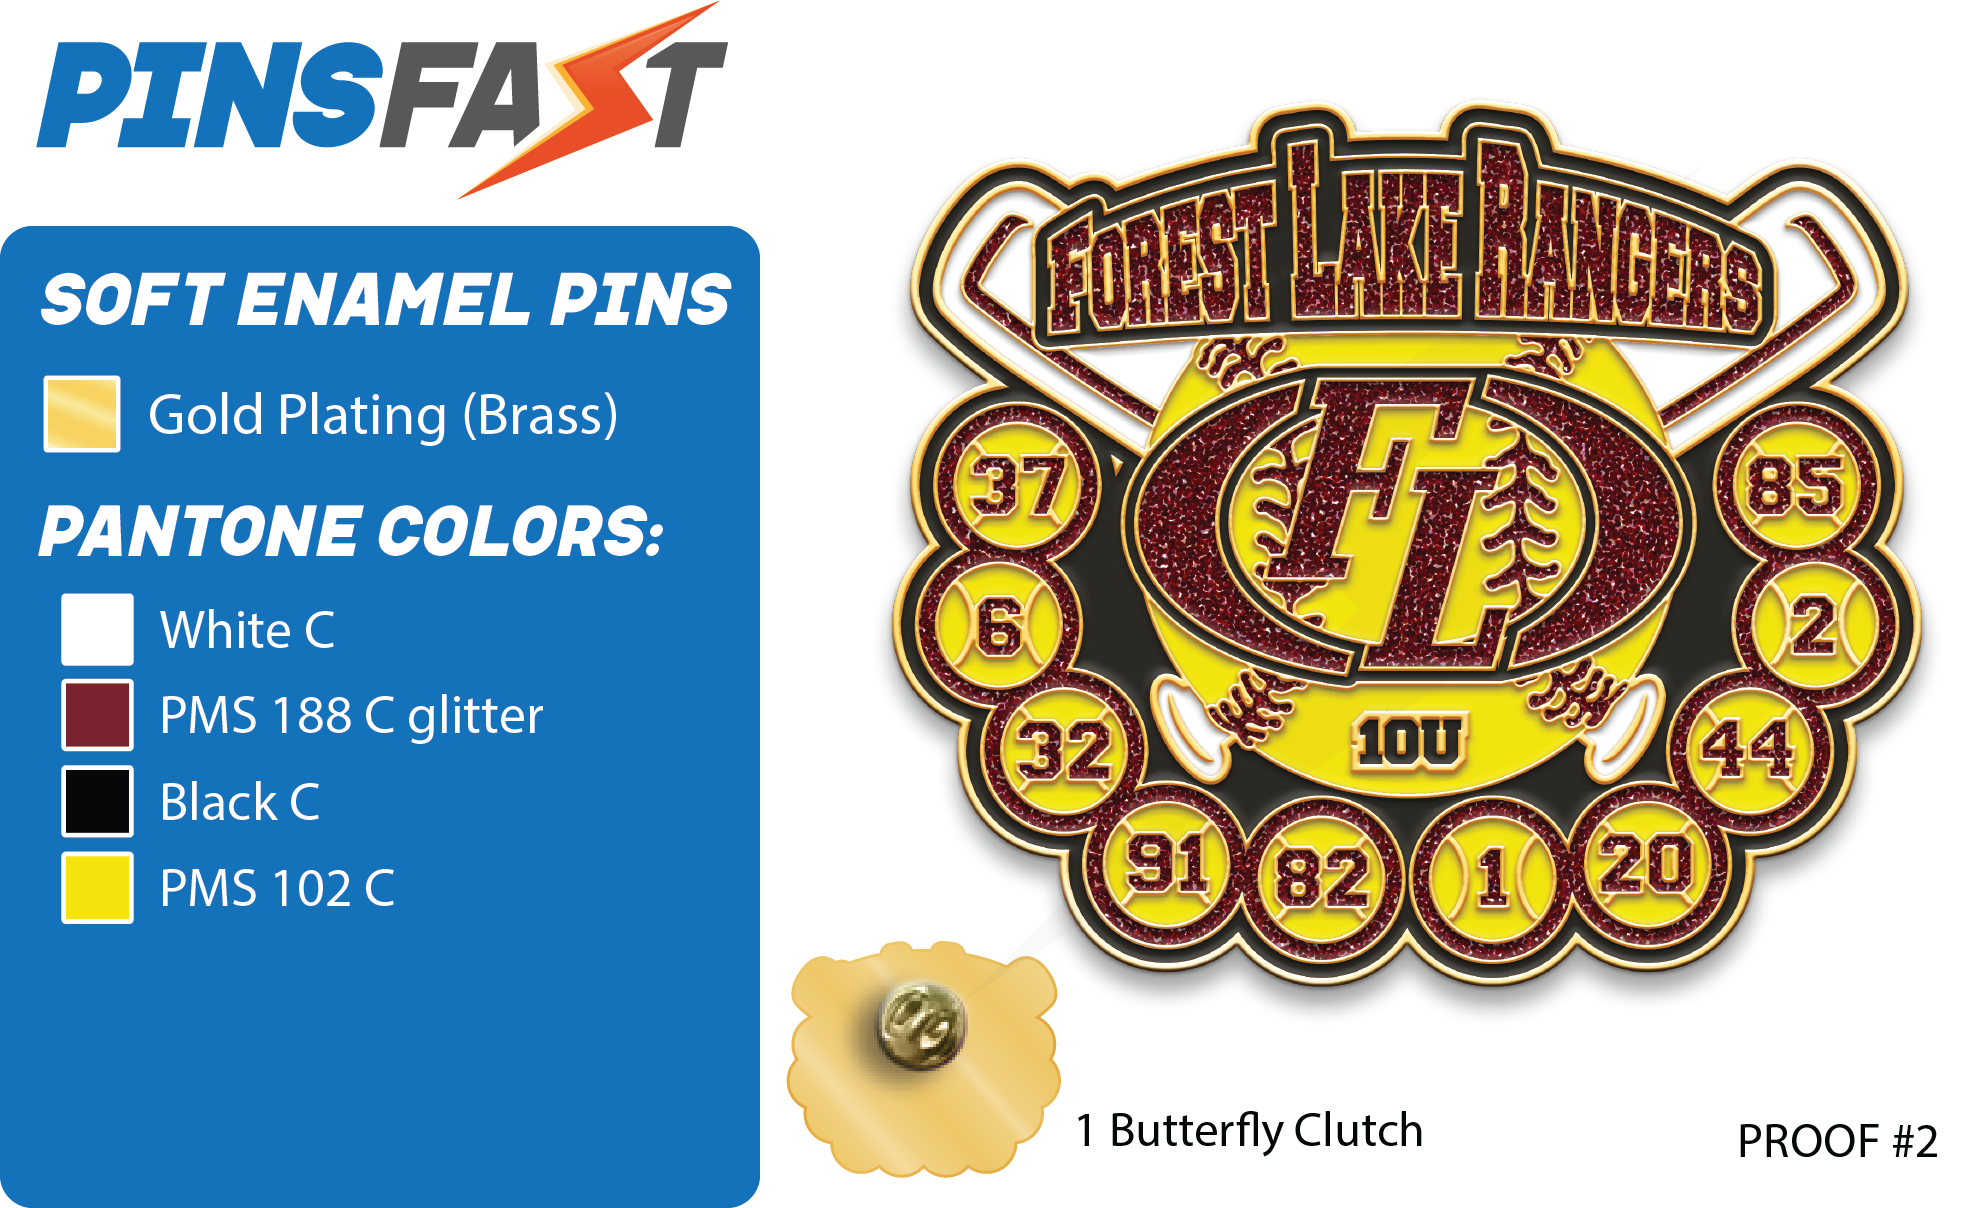 forest lake rangers softball trading pins